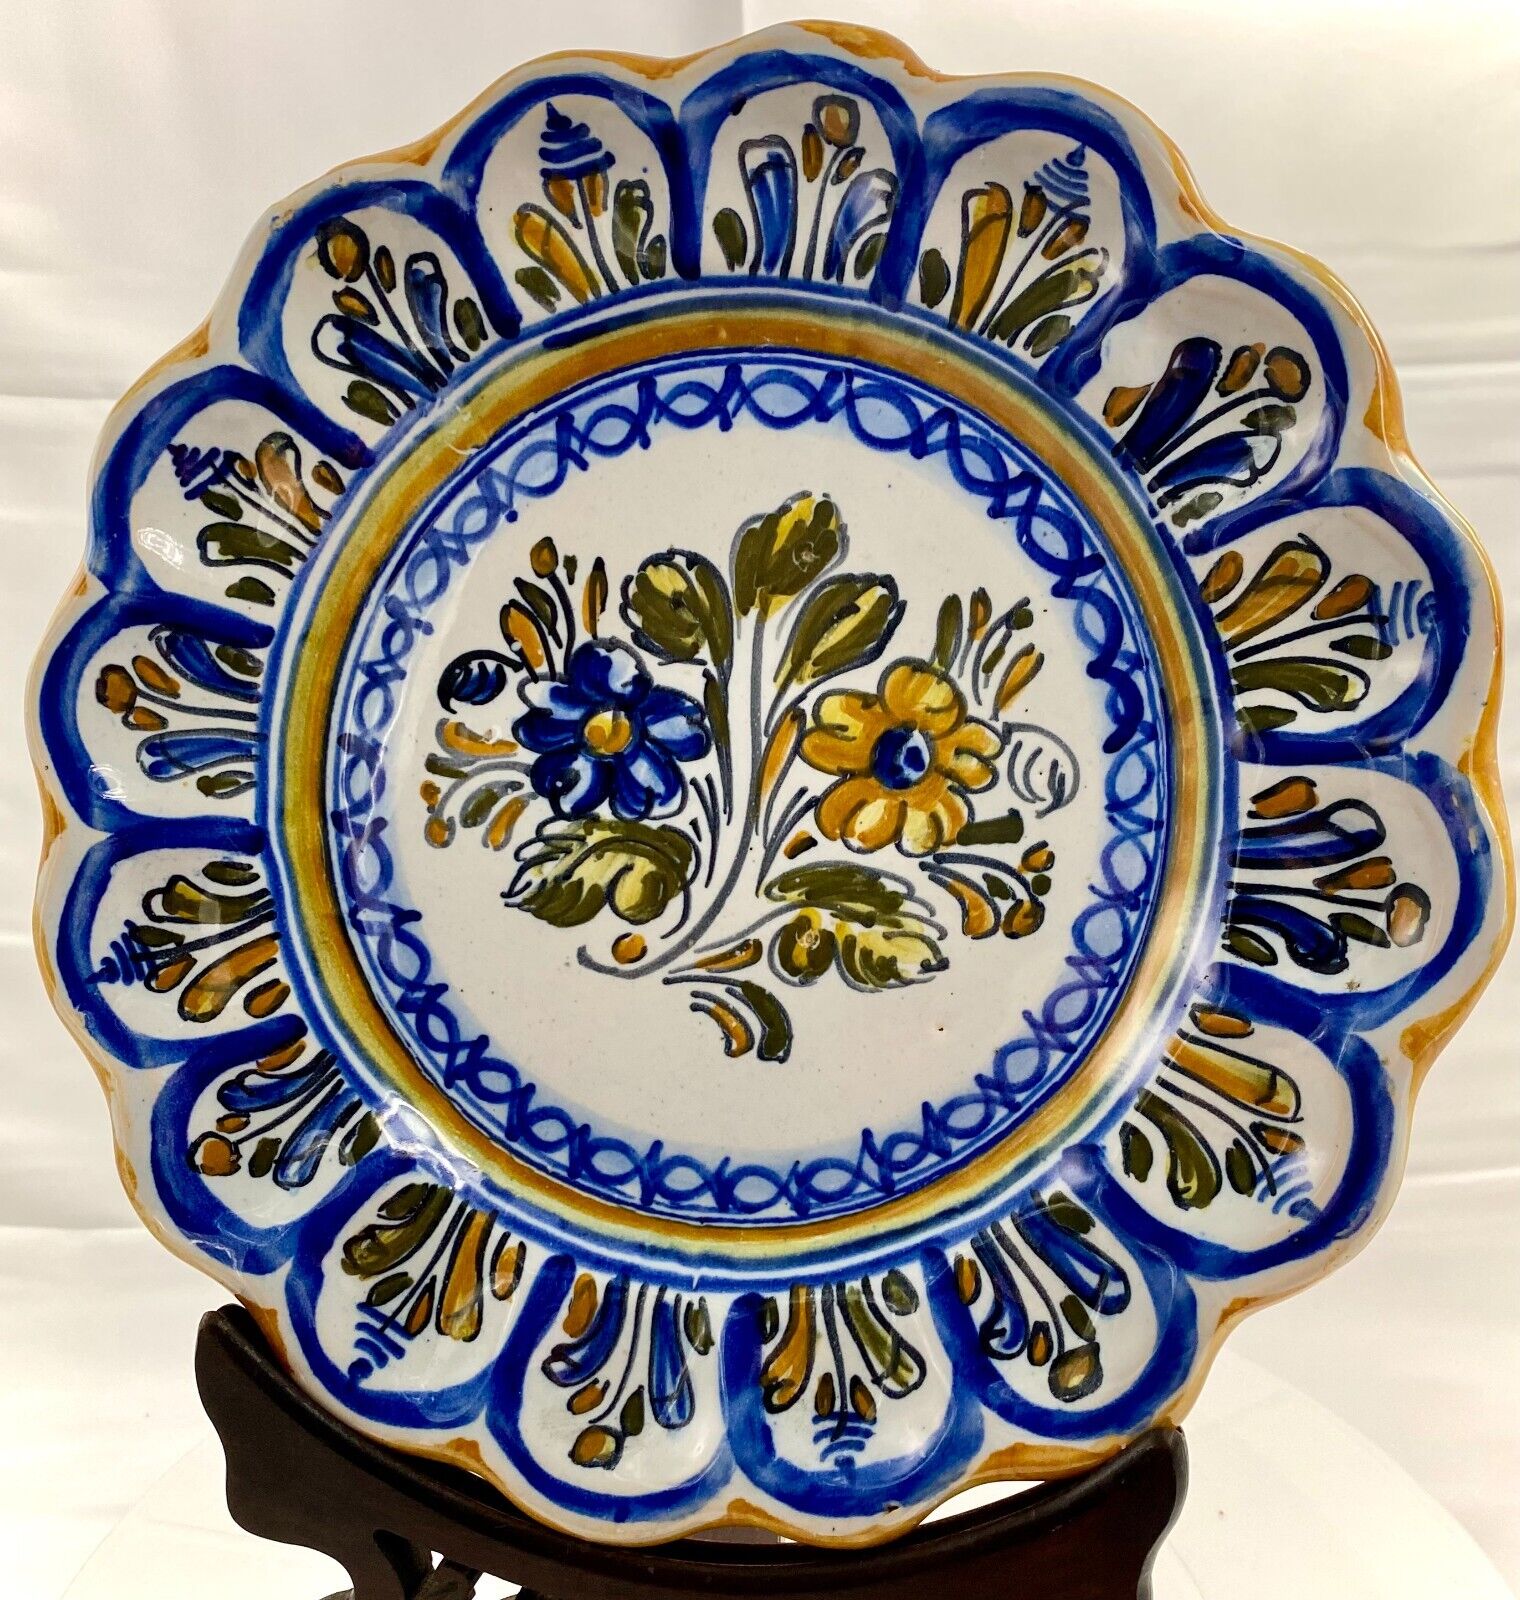 VTG. TALAVERA (SPAIN) HAND PAINTED/SCALLOPED FLOWERED BLUE & GOLD PLATE 10\